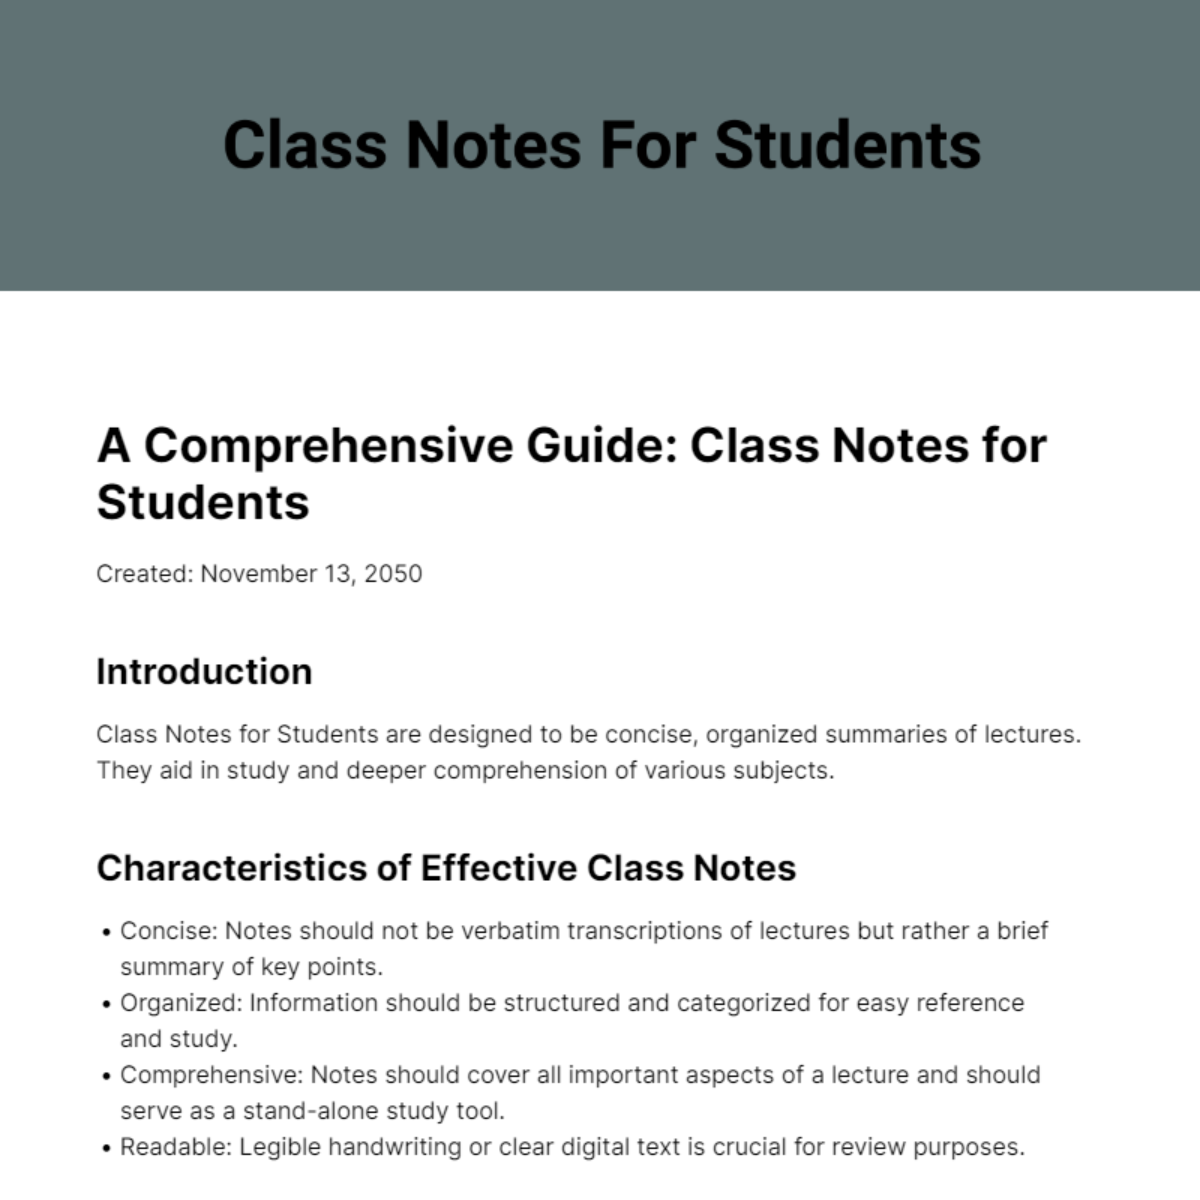 Class Note for Students Template